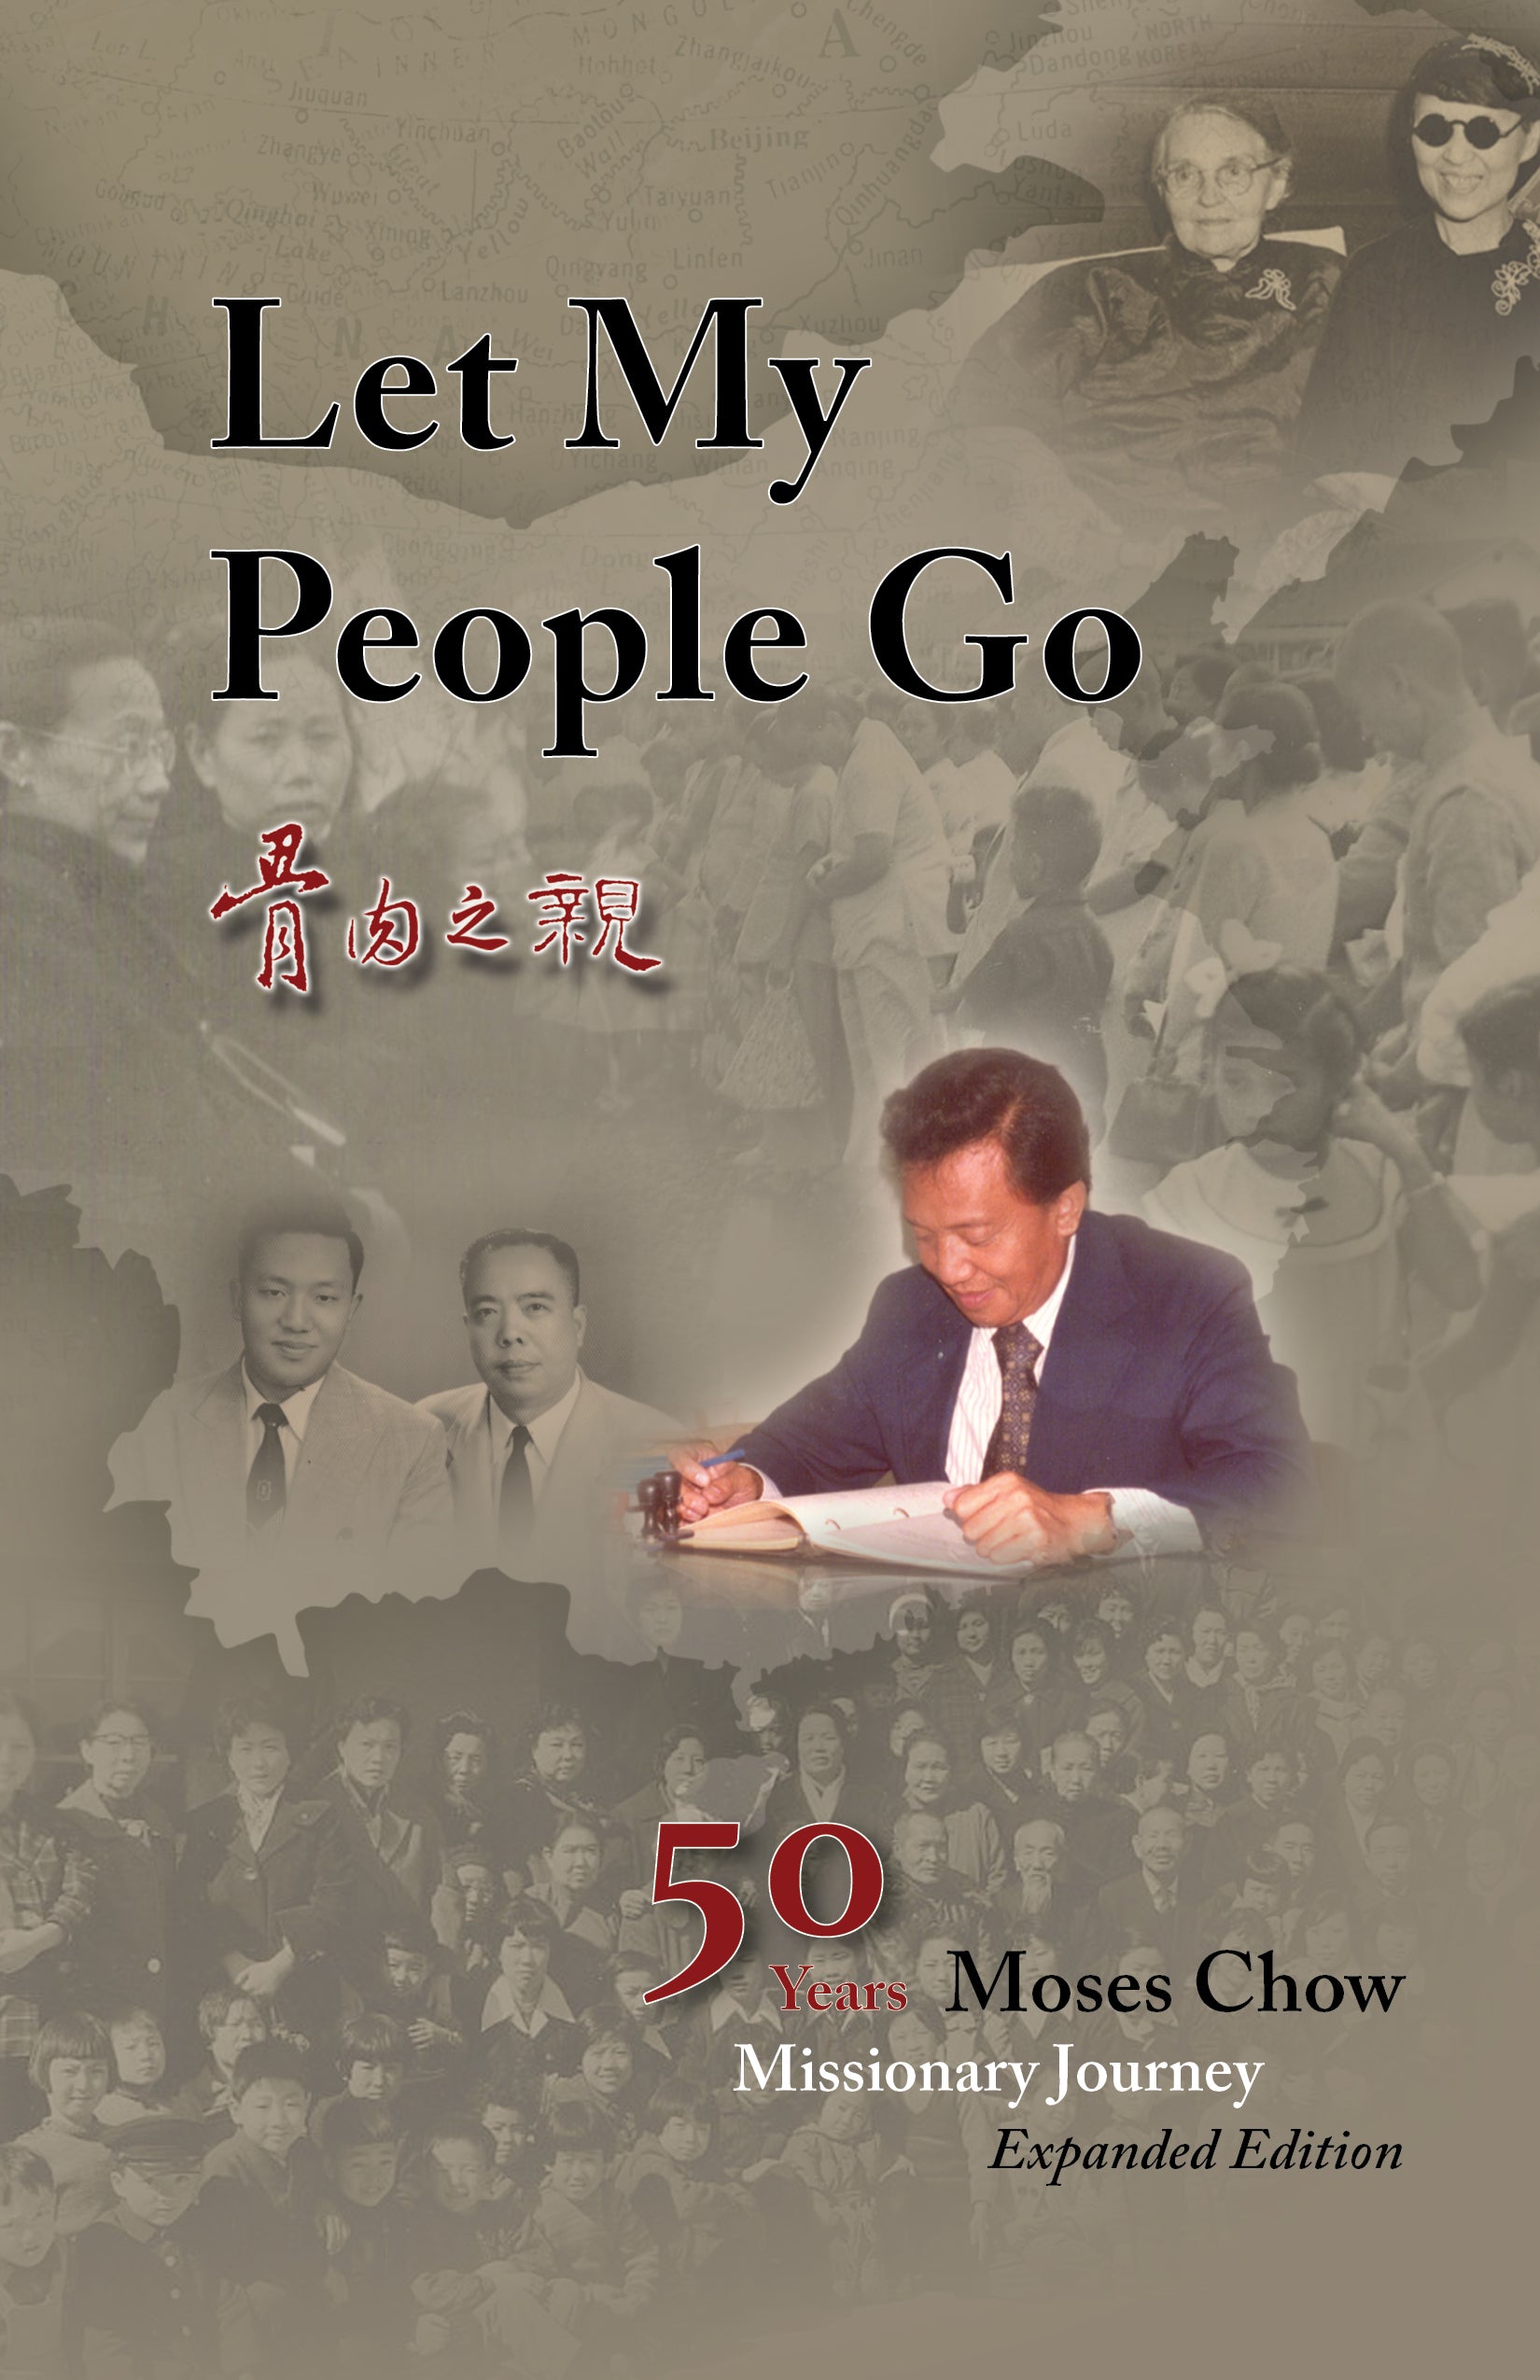 Let My People Go! - Moses Chow's Missionary Journey - English E-book FREE